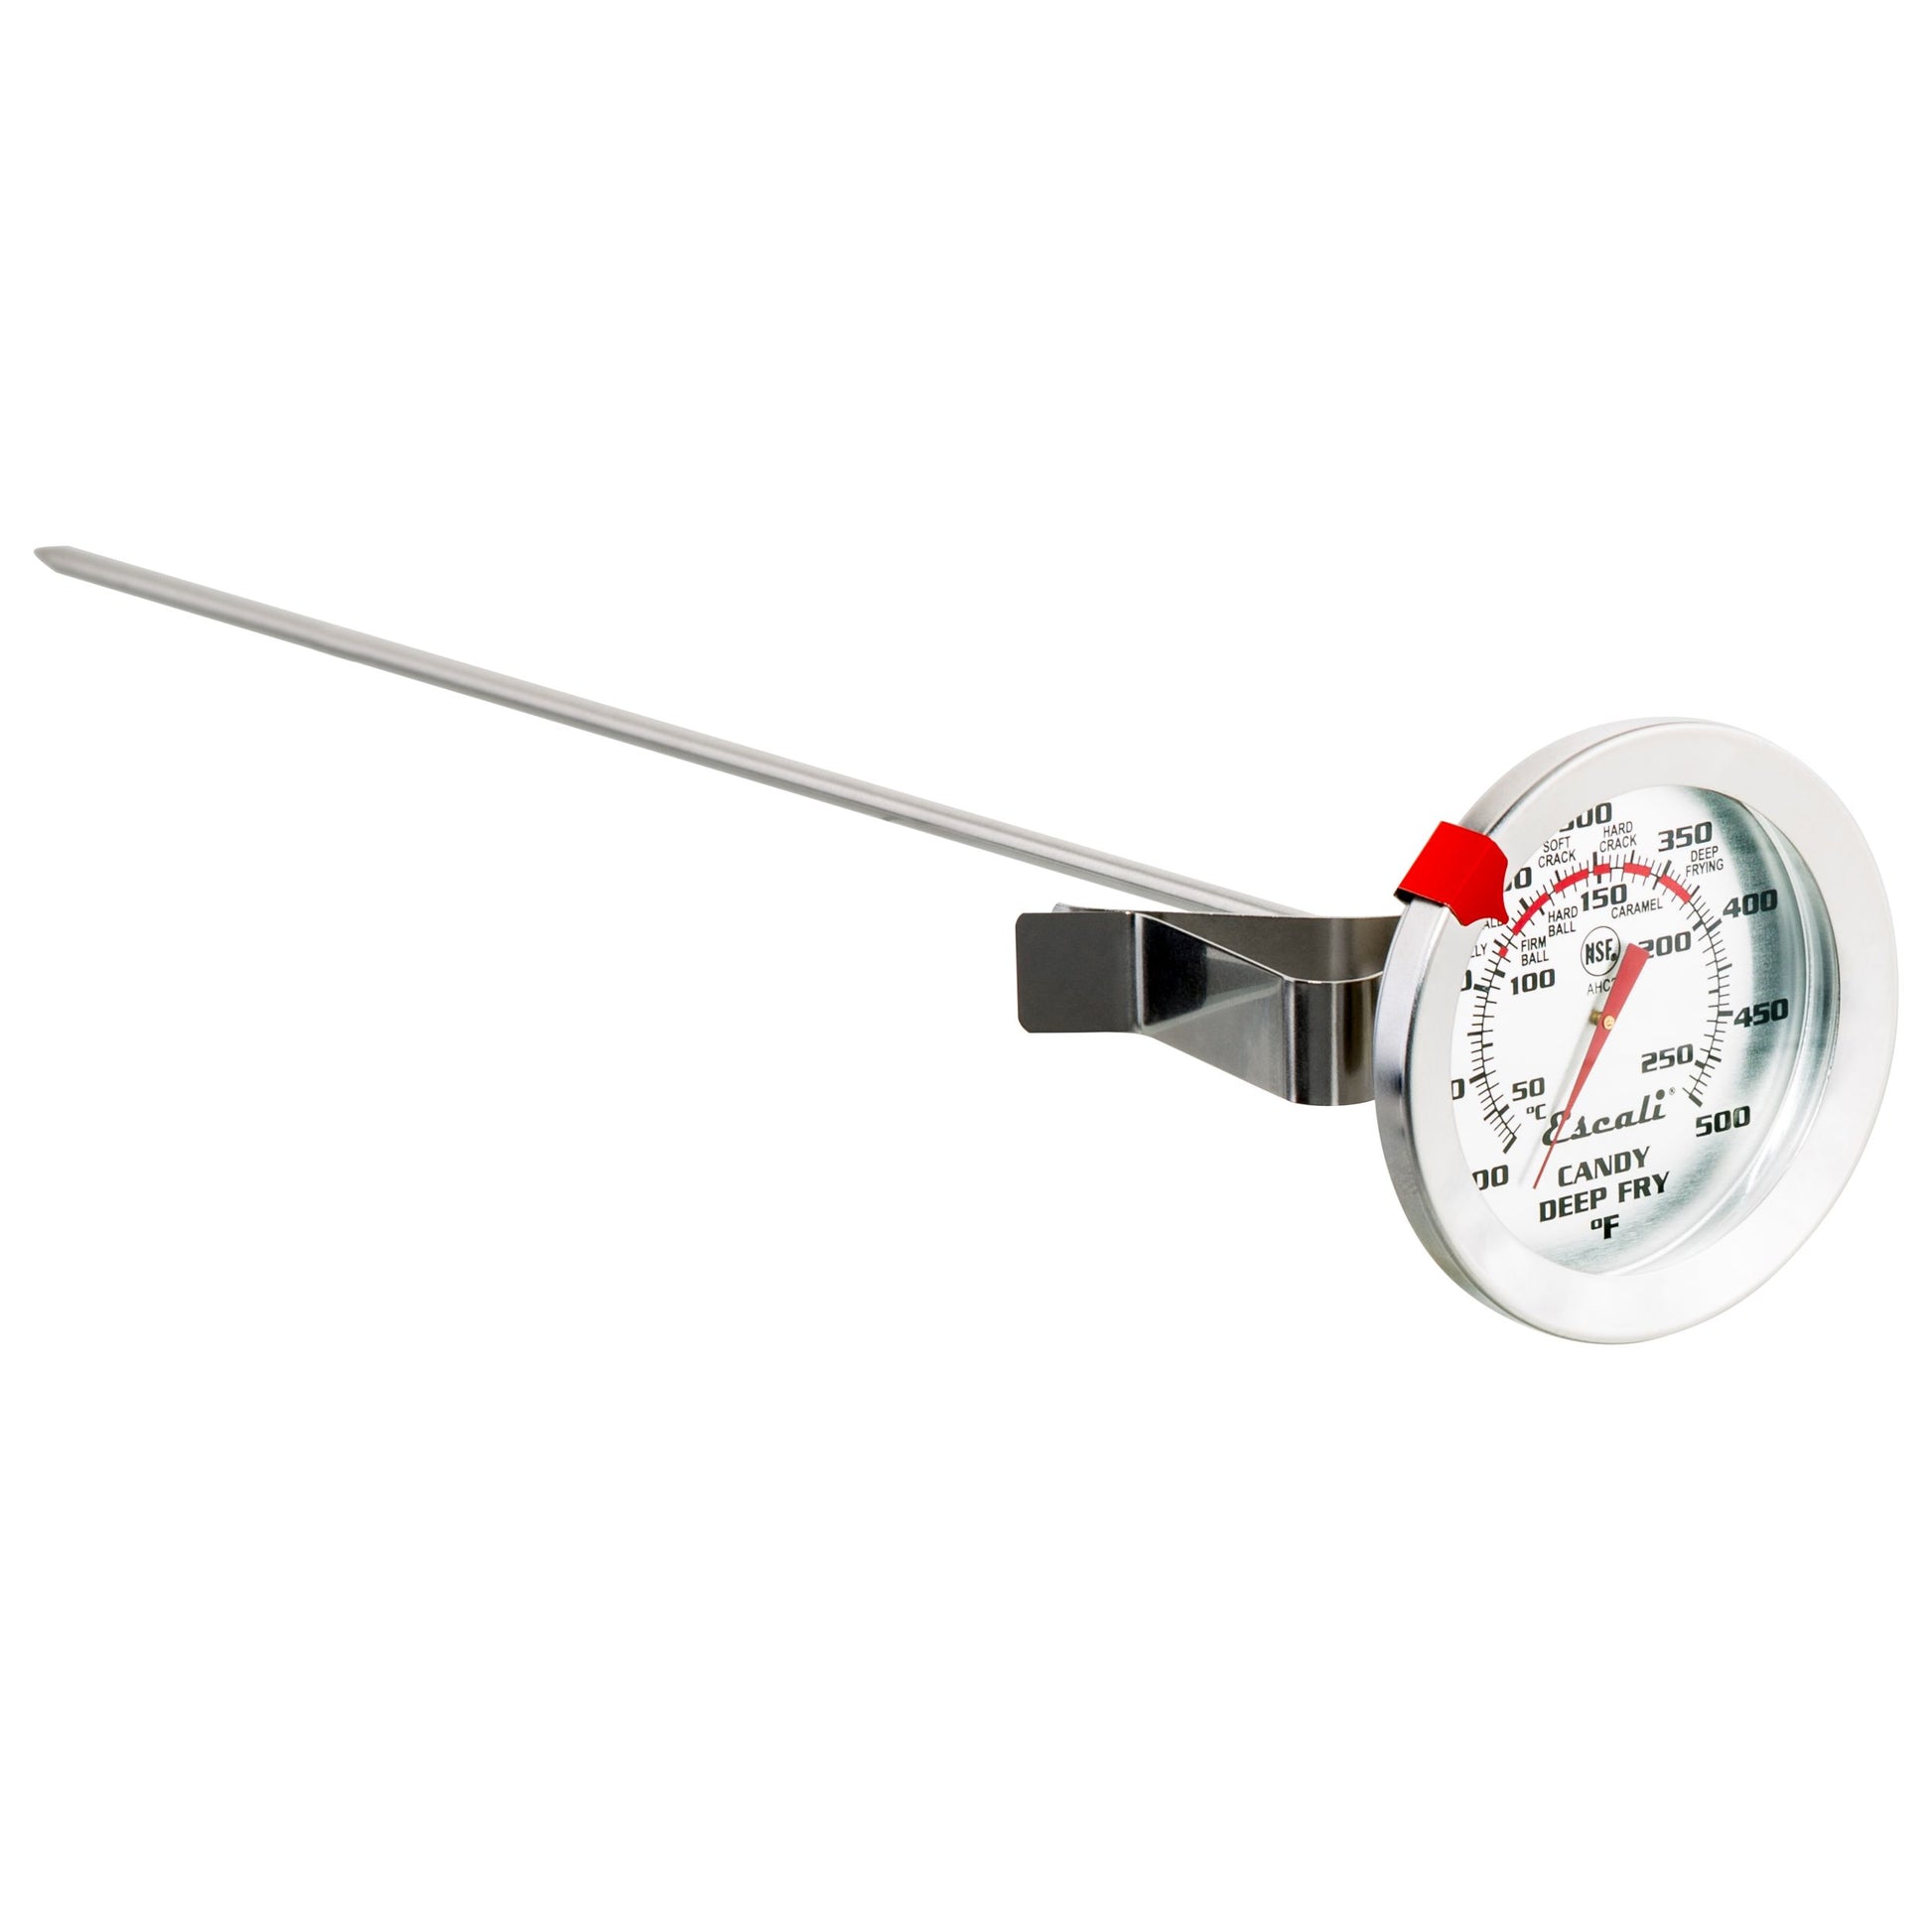 Craft911 Stainless Steel Analog Candy Deep Fry Thermometer - Accurate & Fast Read Food Thermometer, Silver